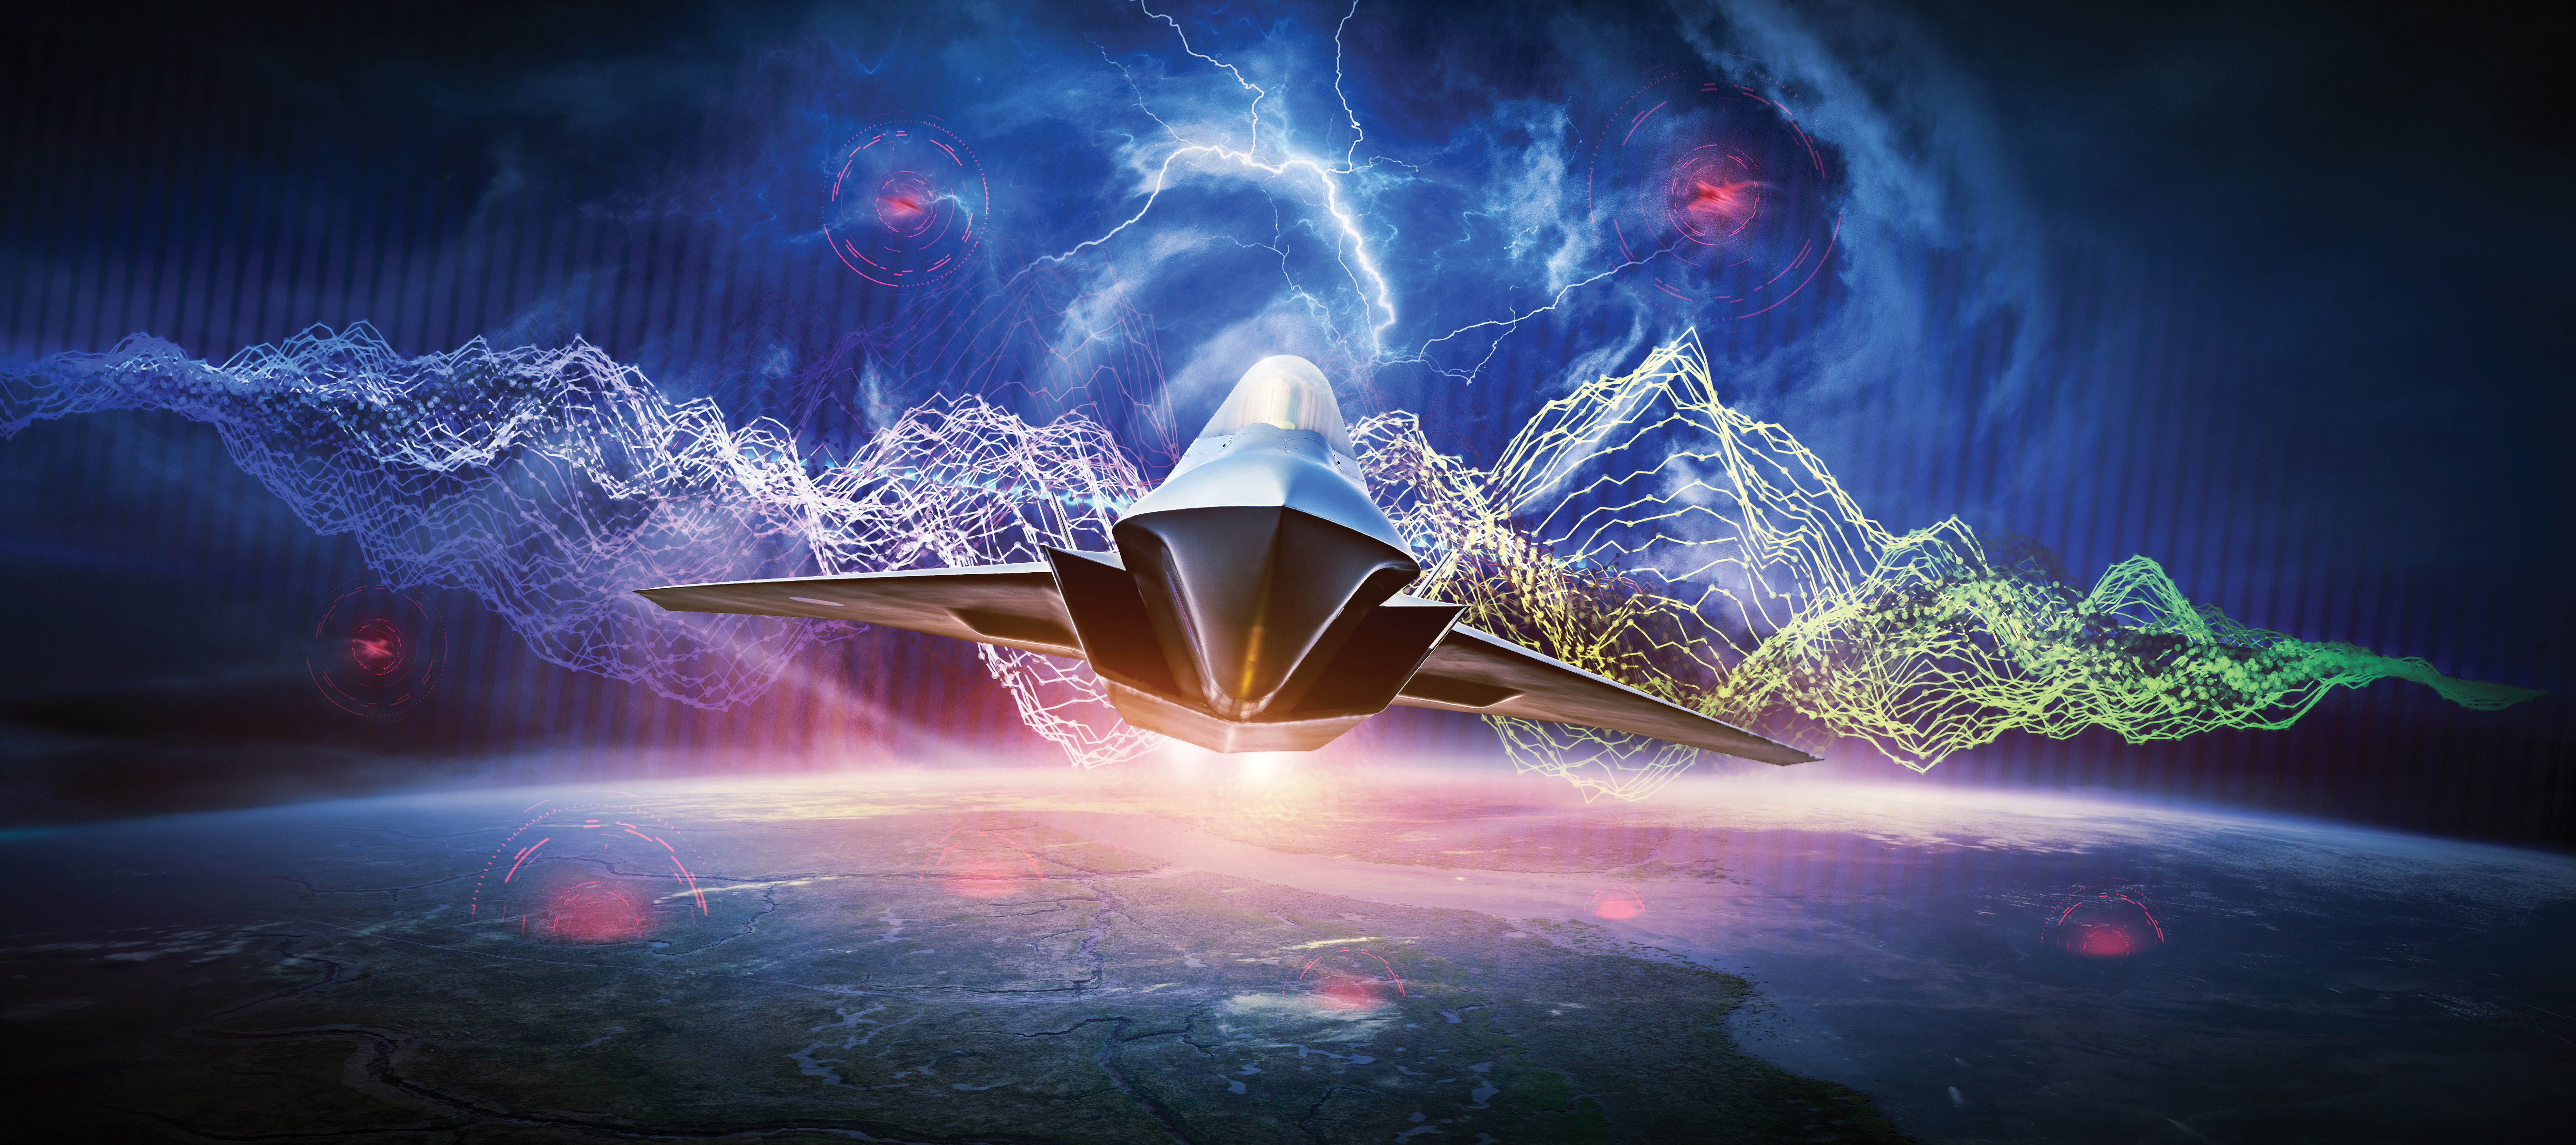 Futuristic image of aircraft flying at night, with lightning waves around it.